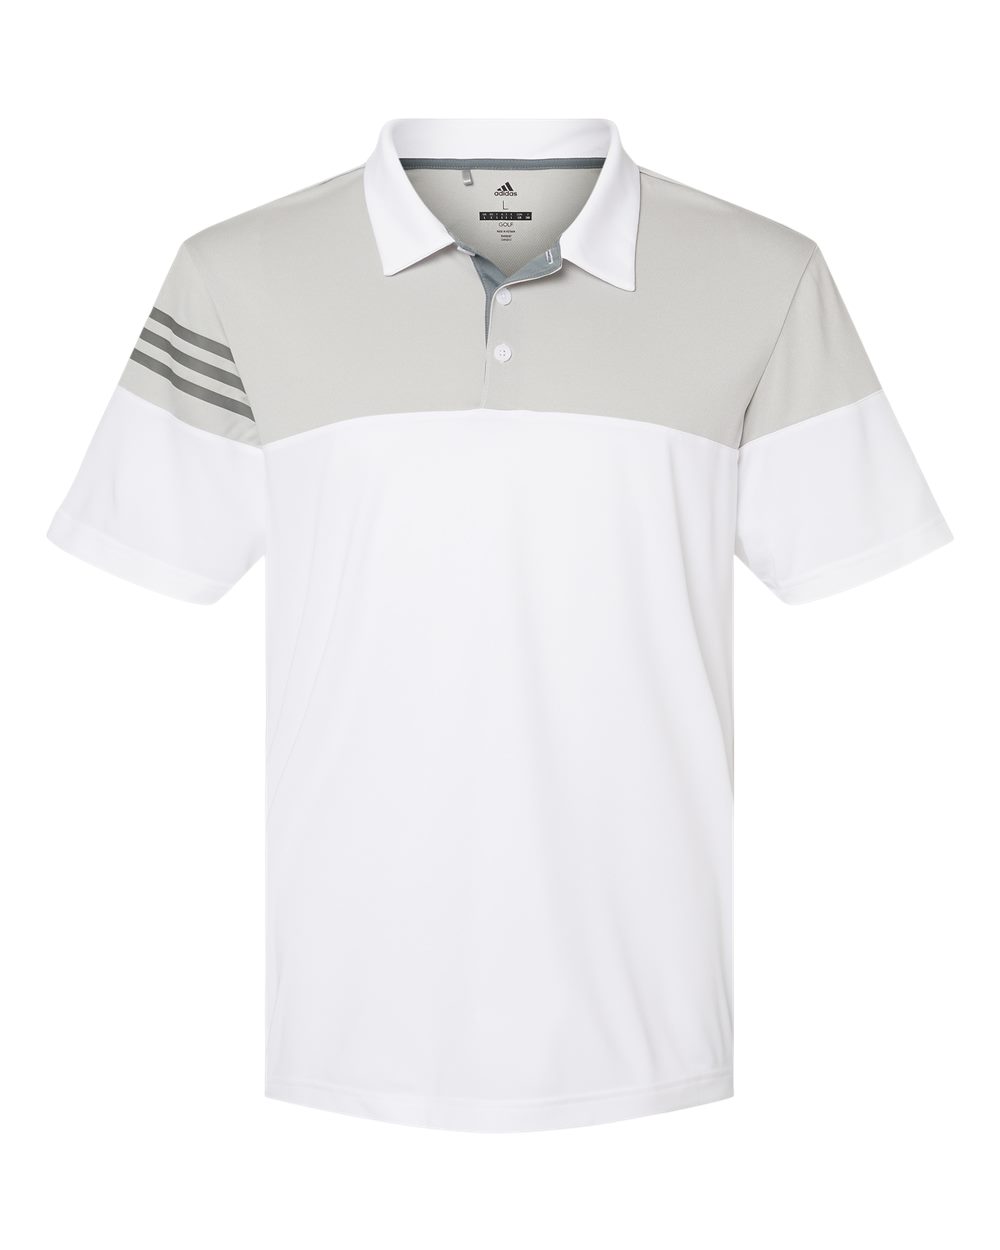 Picture of Adidas - Heathered 3-Stripes Colorblock Polo